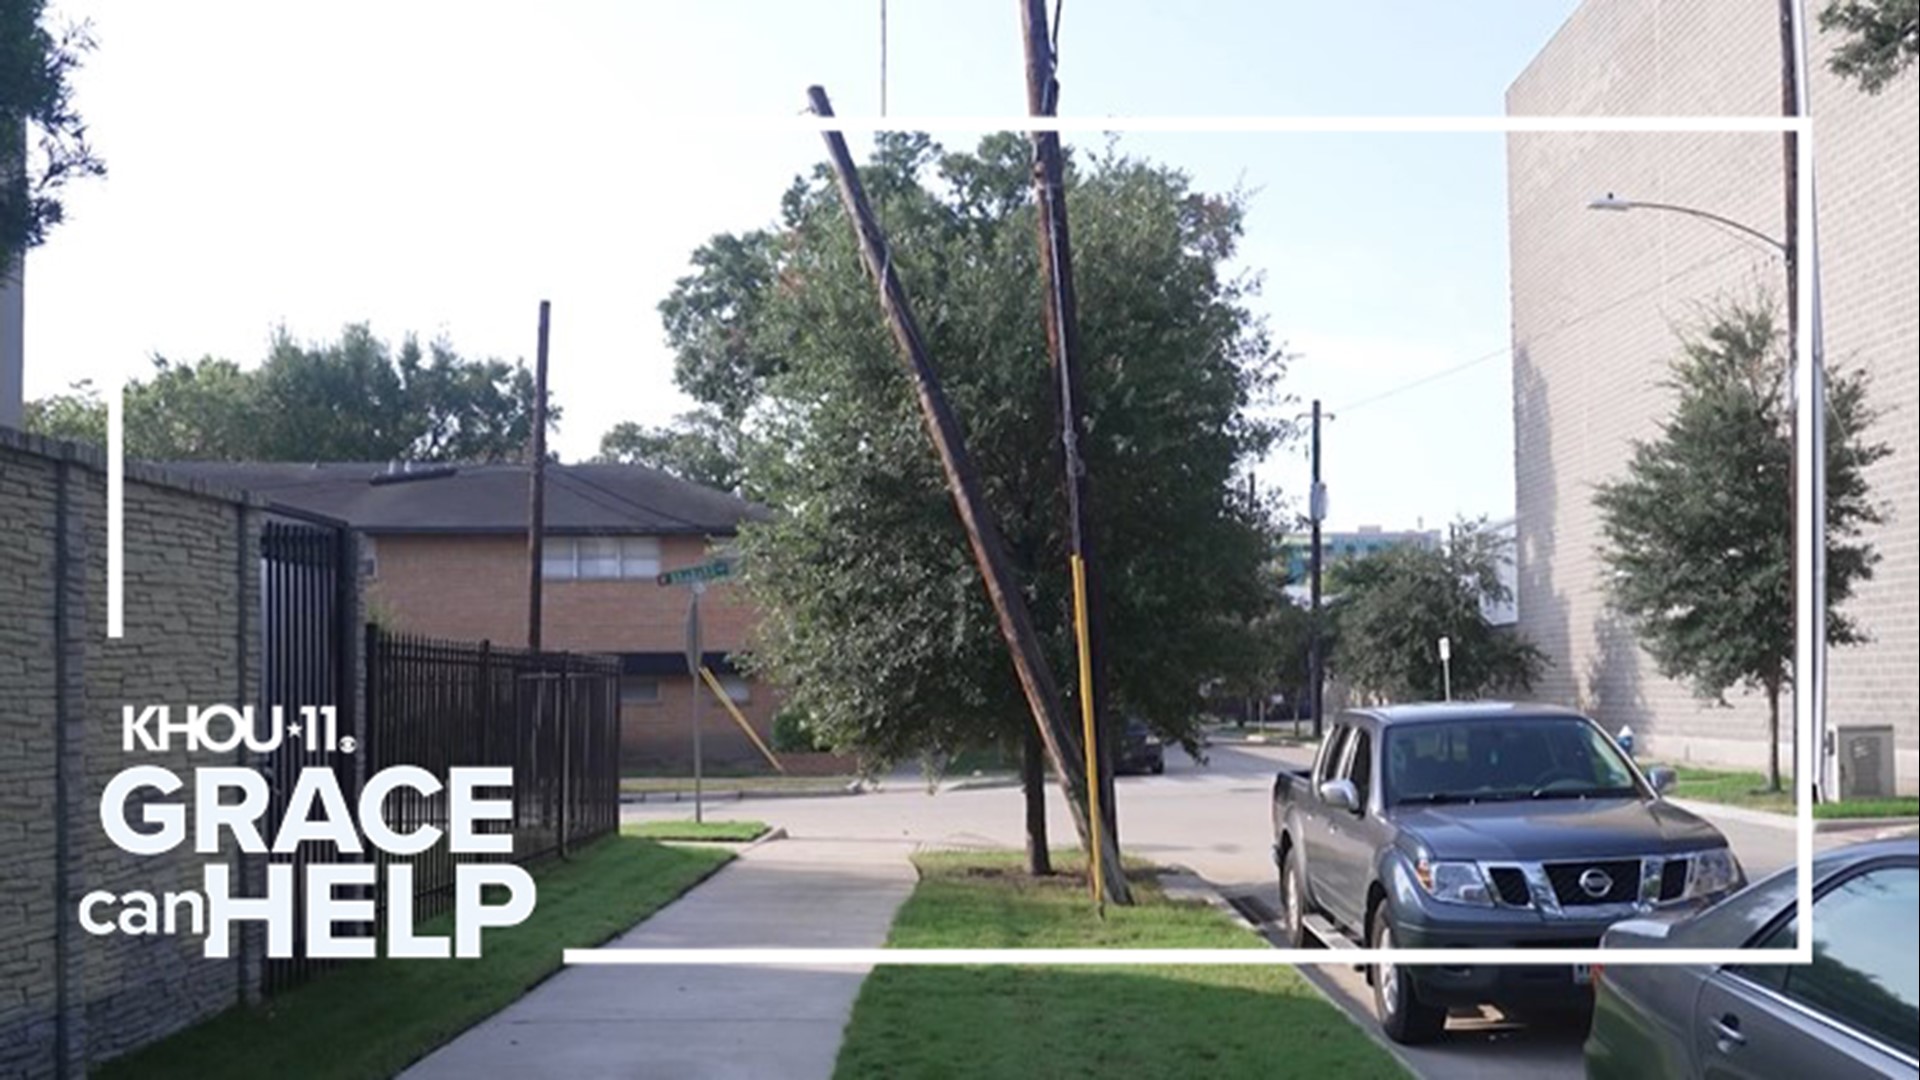 A resident reached out to KHOU 11's Grace White after he was worried the pole could fall and hurt someone because it was leaning right over a sidewalk near a school.